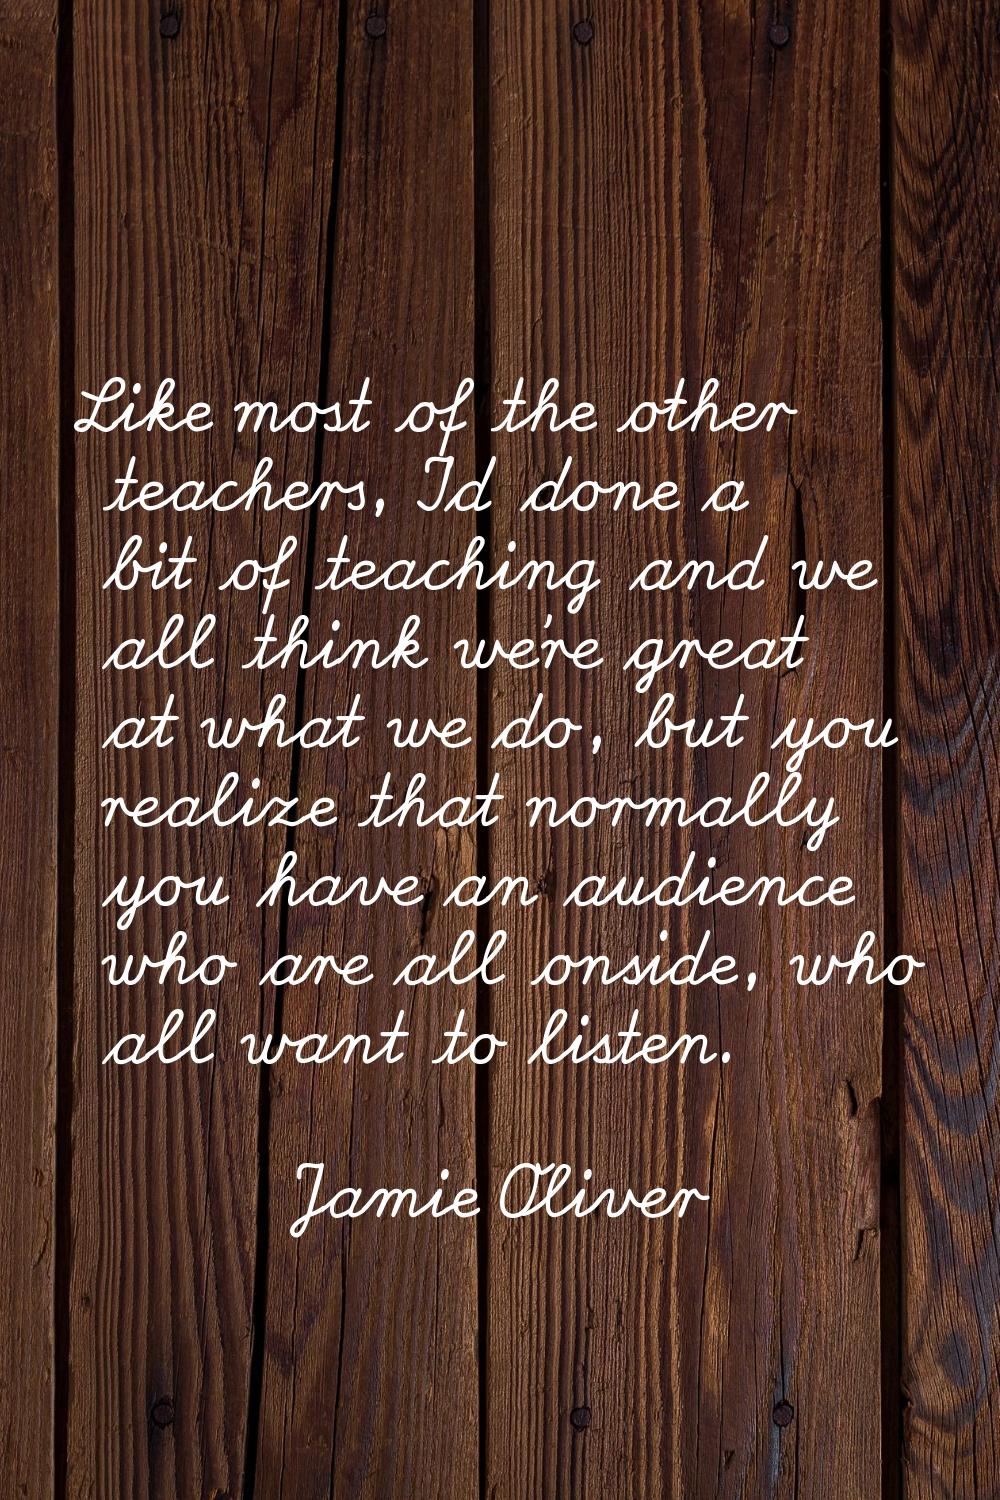 Like most of the other teachers, I'd done a bit of teaching and we all think we're great at what we